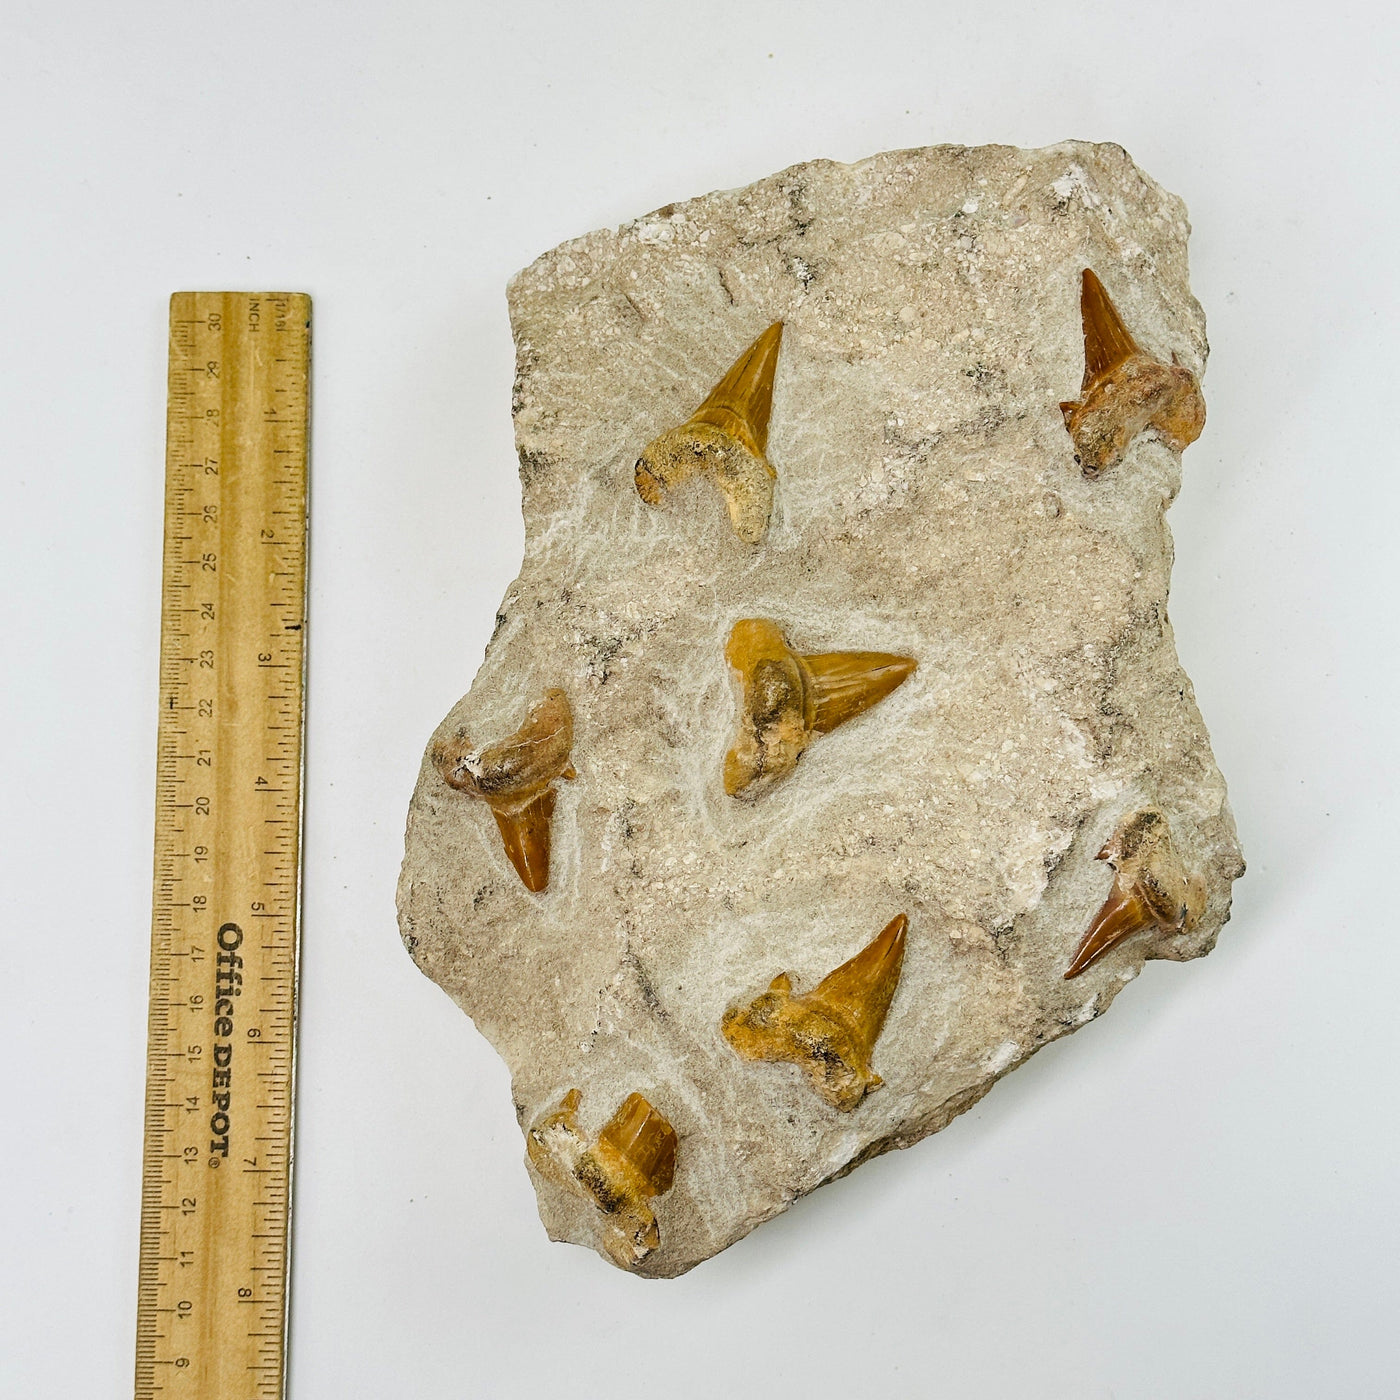 shark tooth fossils on large stone next to a ruler for size reference